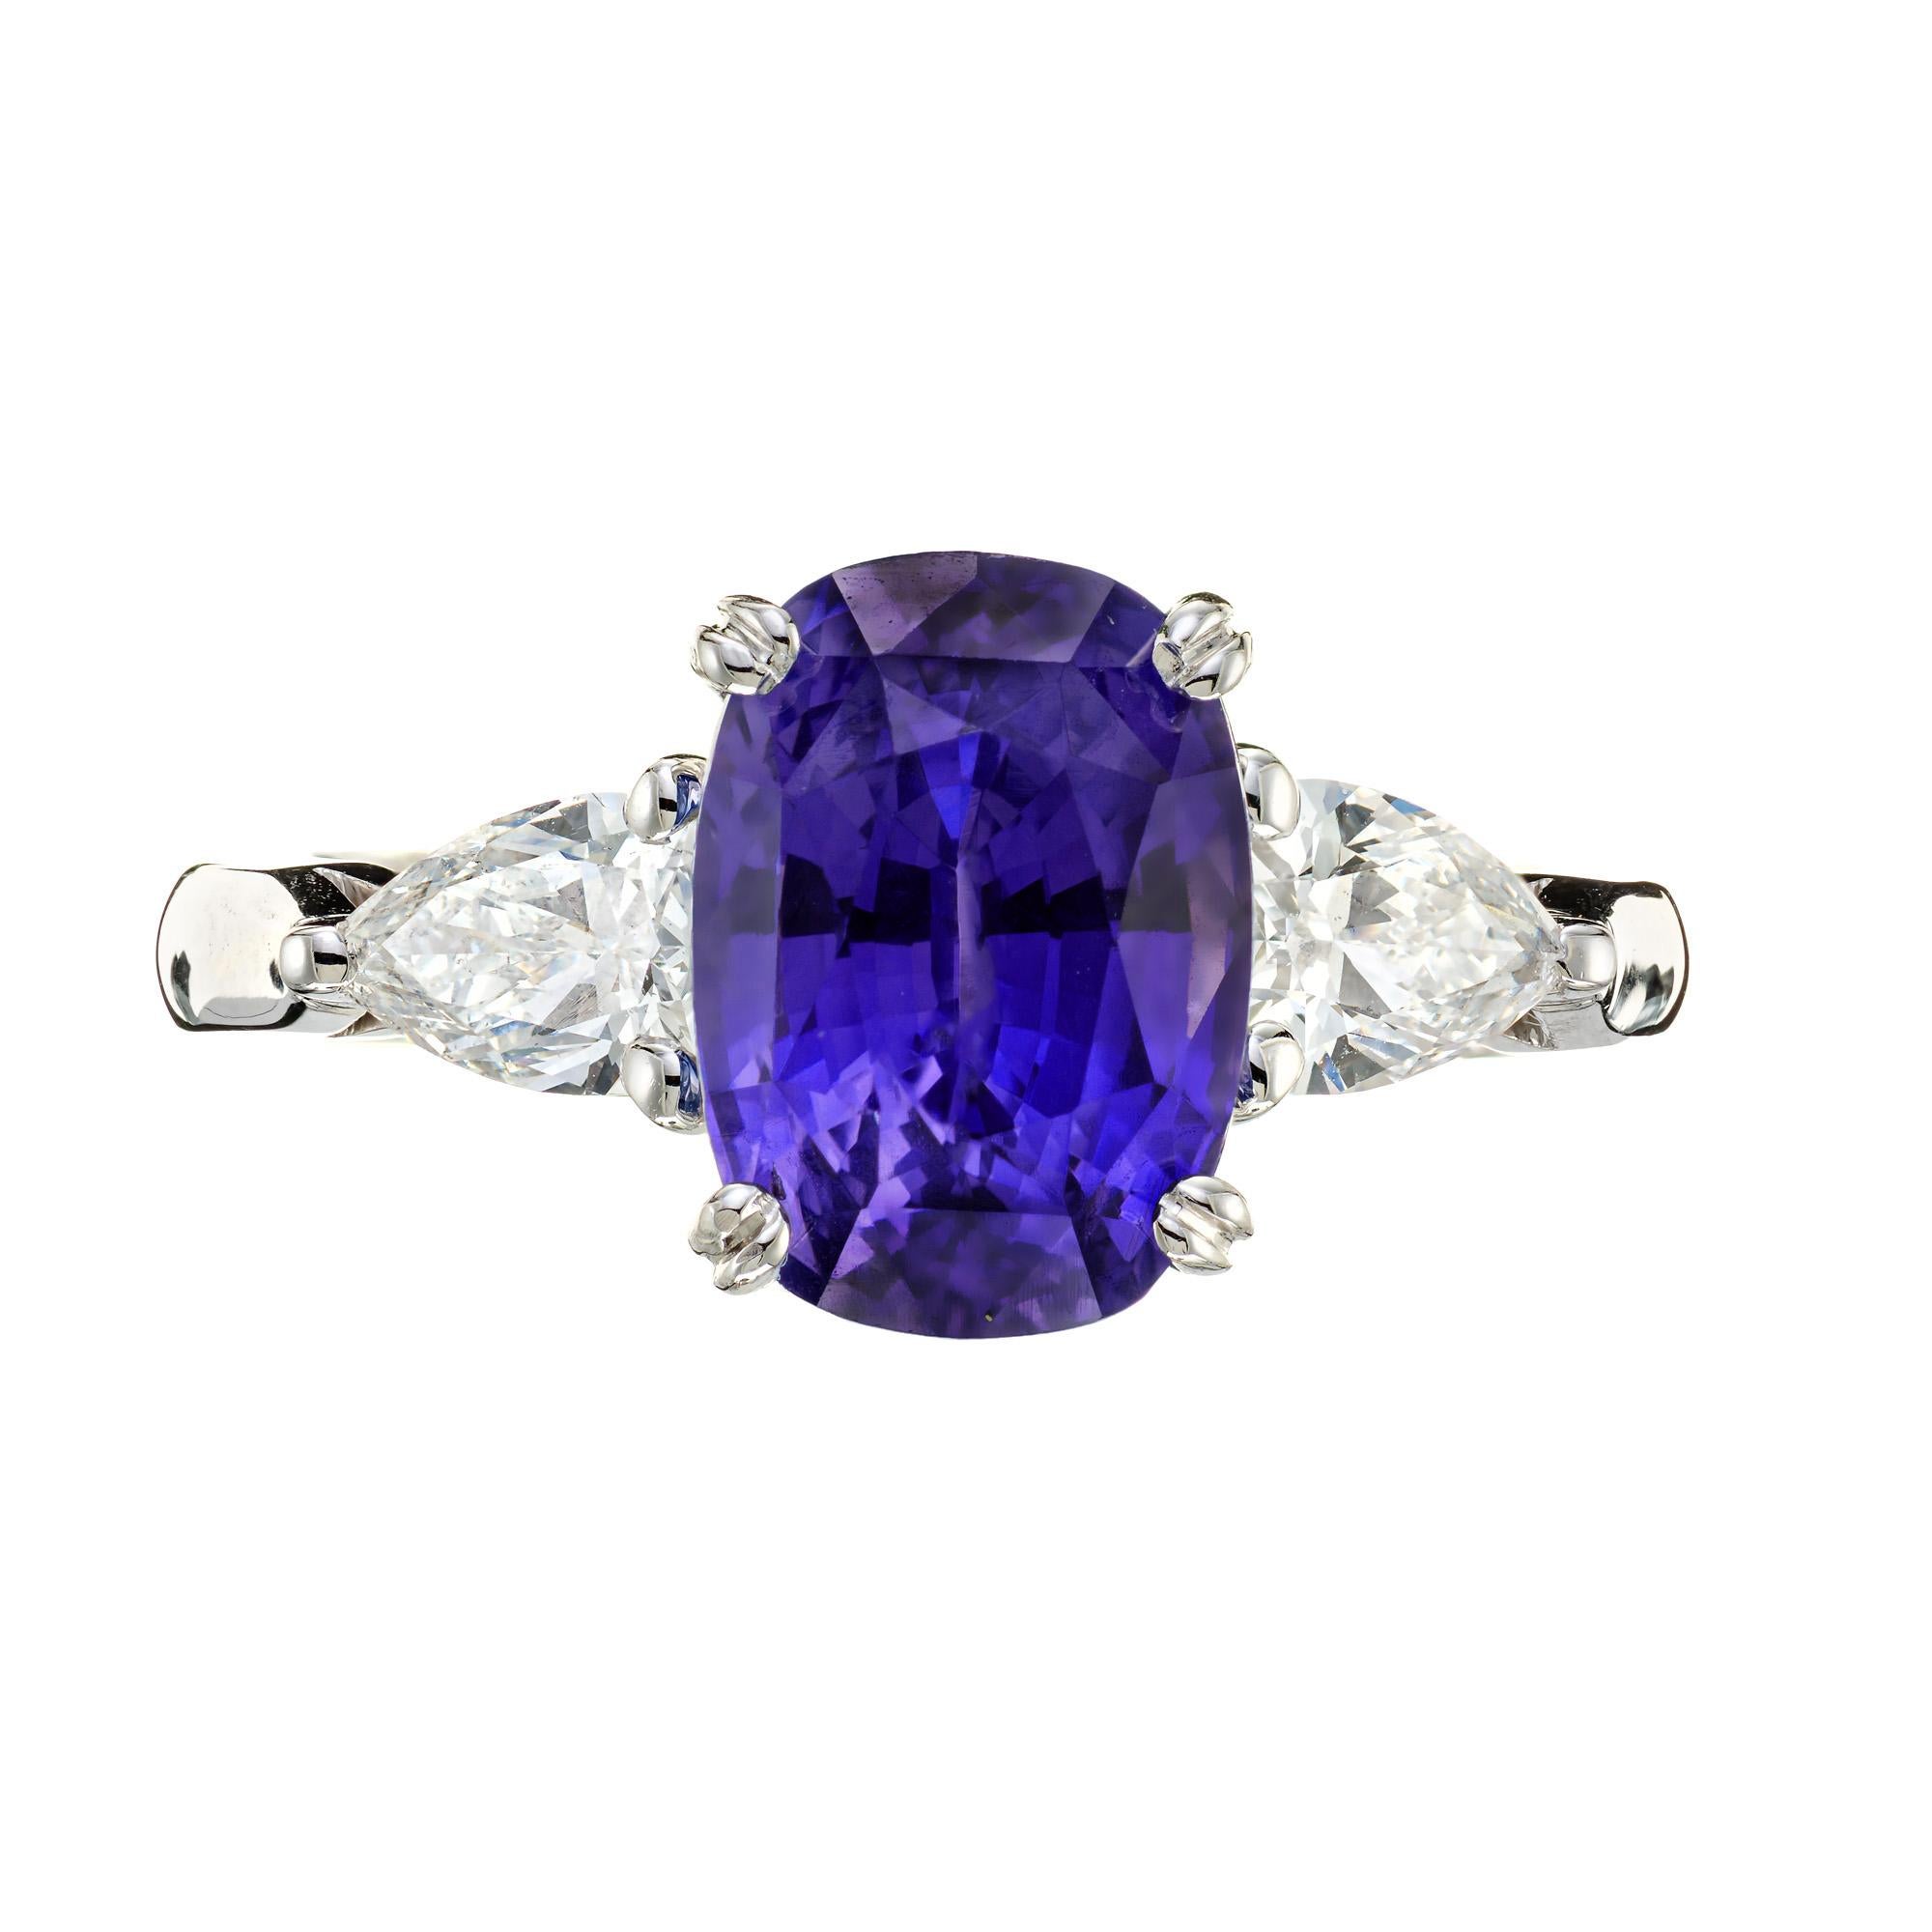 Elongated cushion cut natural no heat GIA certified color change Sapphire and diamond engagement ring. 4.73 Carat cushion cut sapphire center stone set in a platinum setting with 2 pear shaped accent diamonds. Changes from blue to violet in